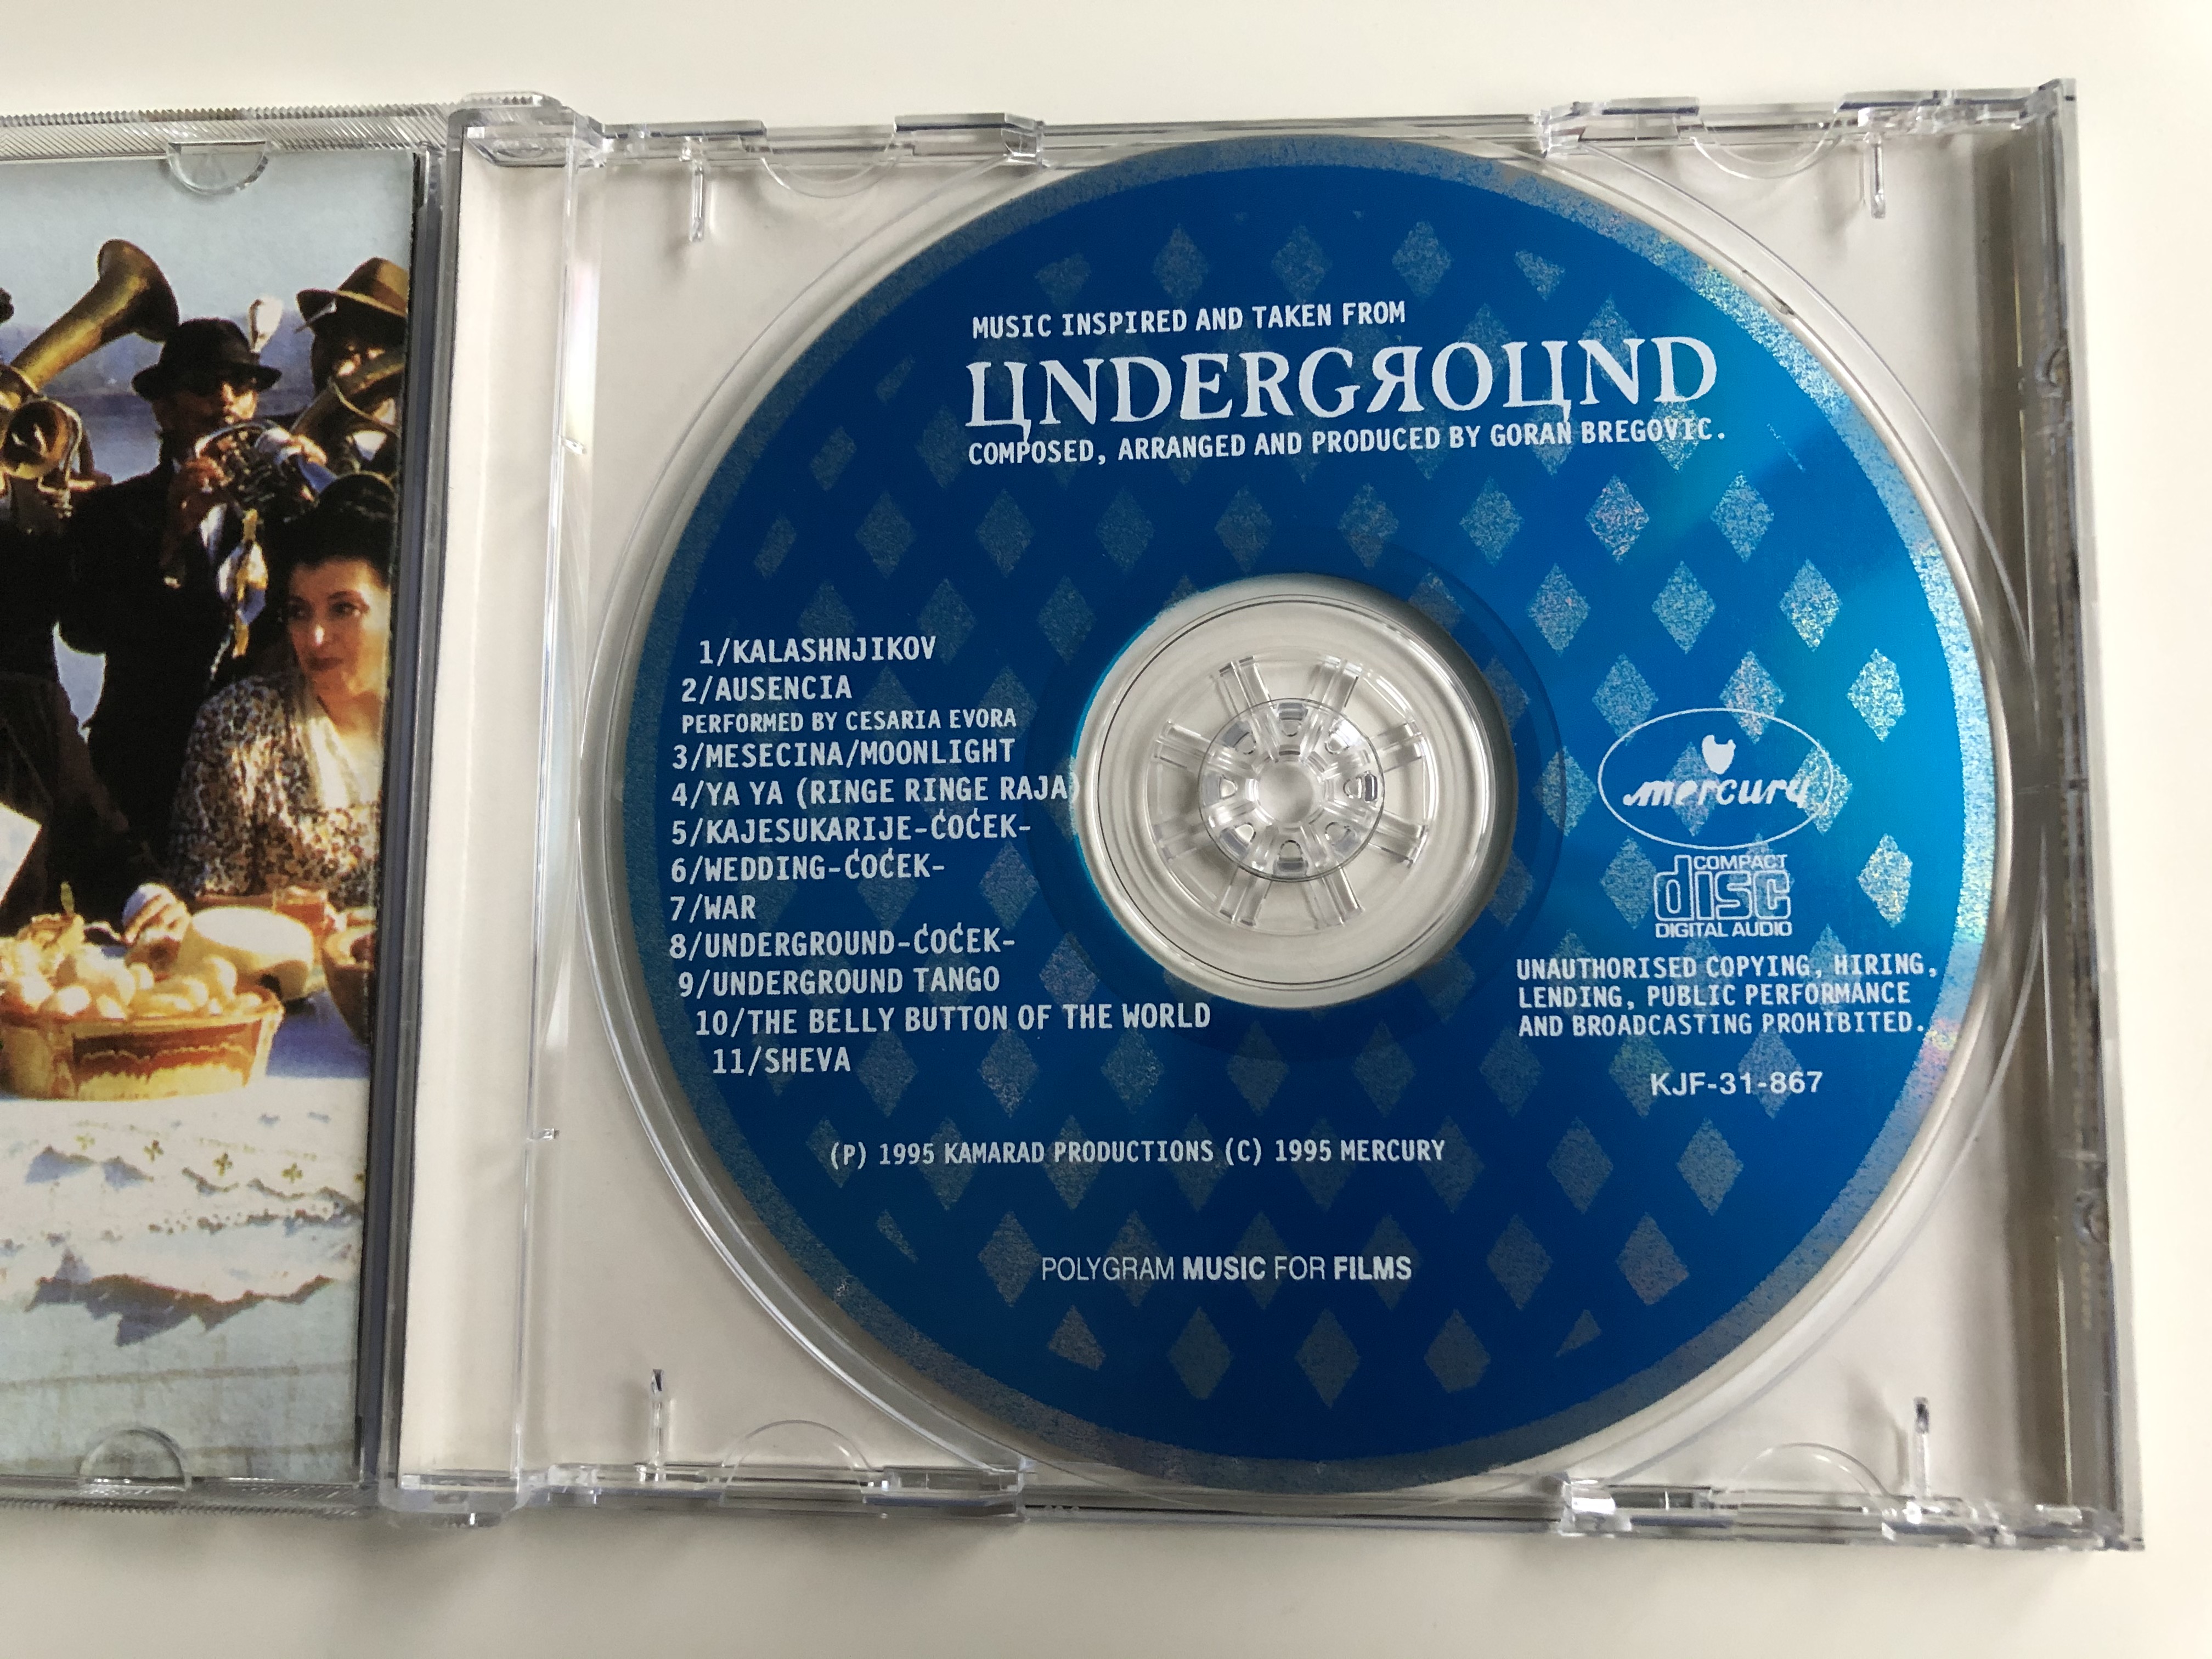 music-inspired-and-taken-from-underground-music-by-goran-bregovic-a-film-by-emir-kusturica-palme-d-or-festival-de-cannes-1995-mercury-audio-cd-1995-528-910-2-3-.jpg